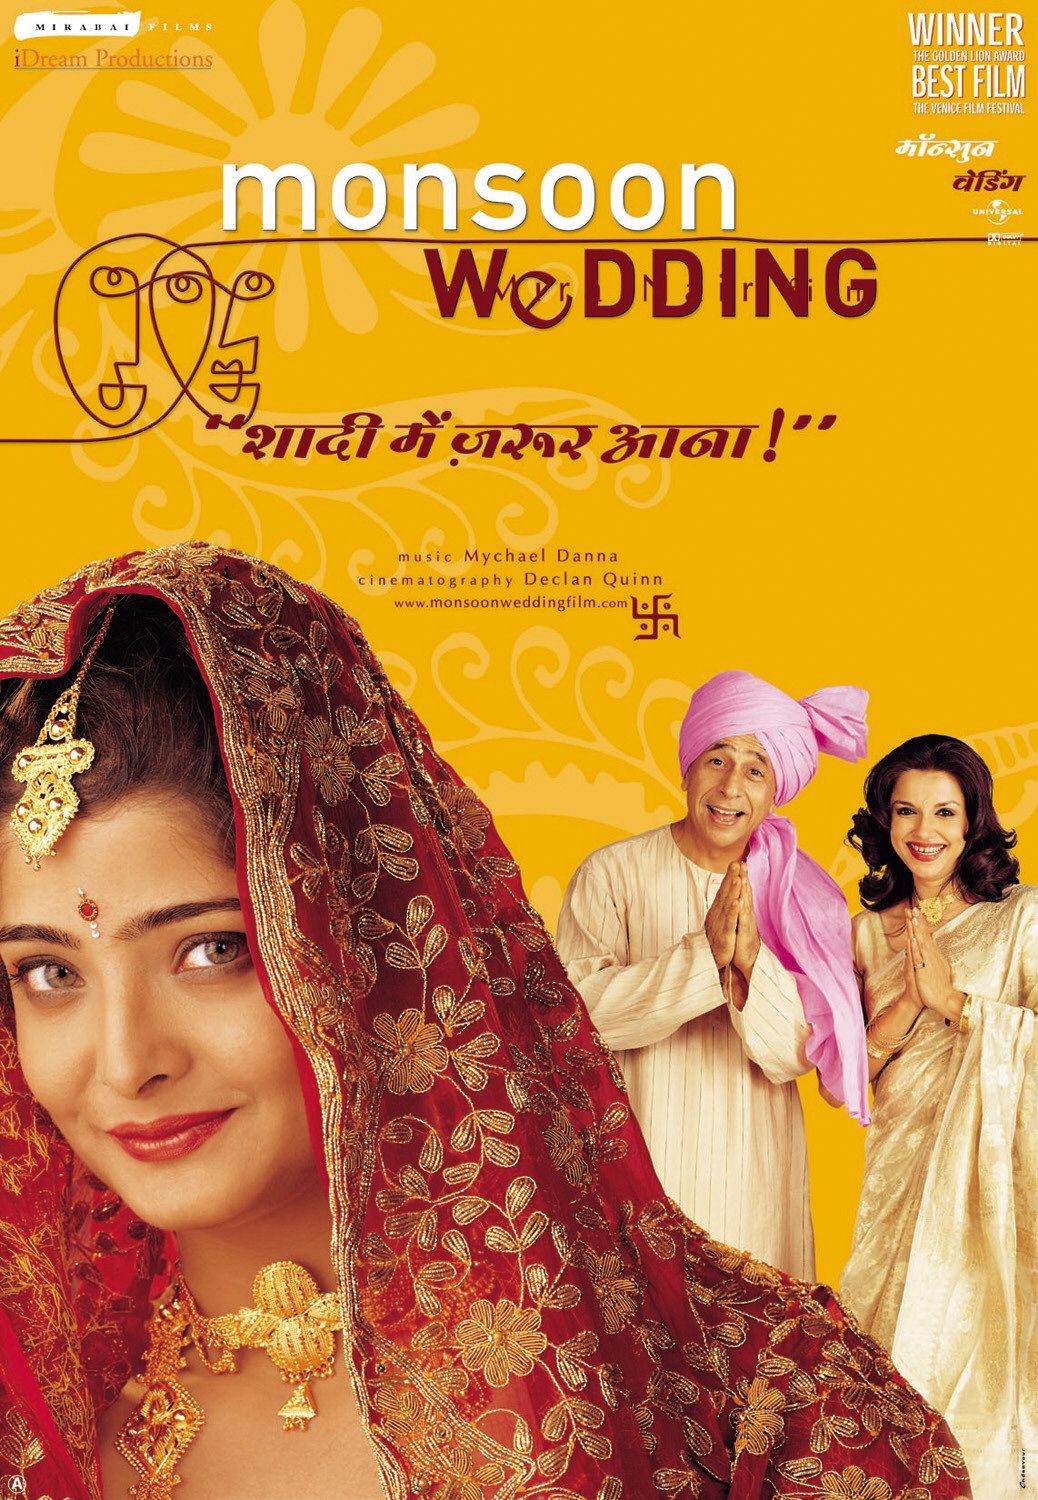 monsoon wedding research paper